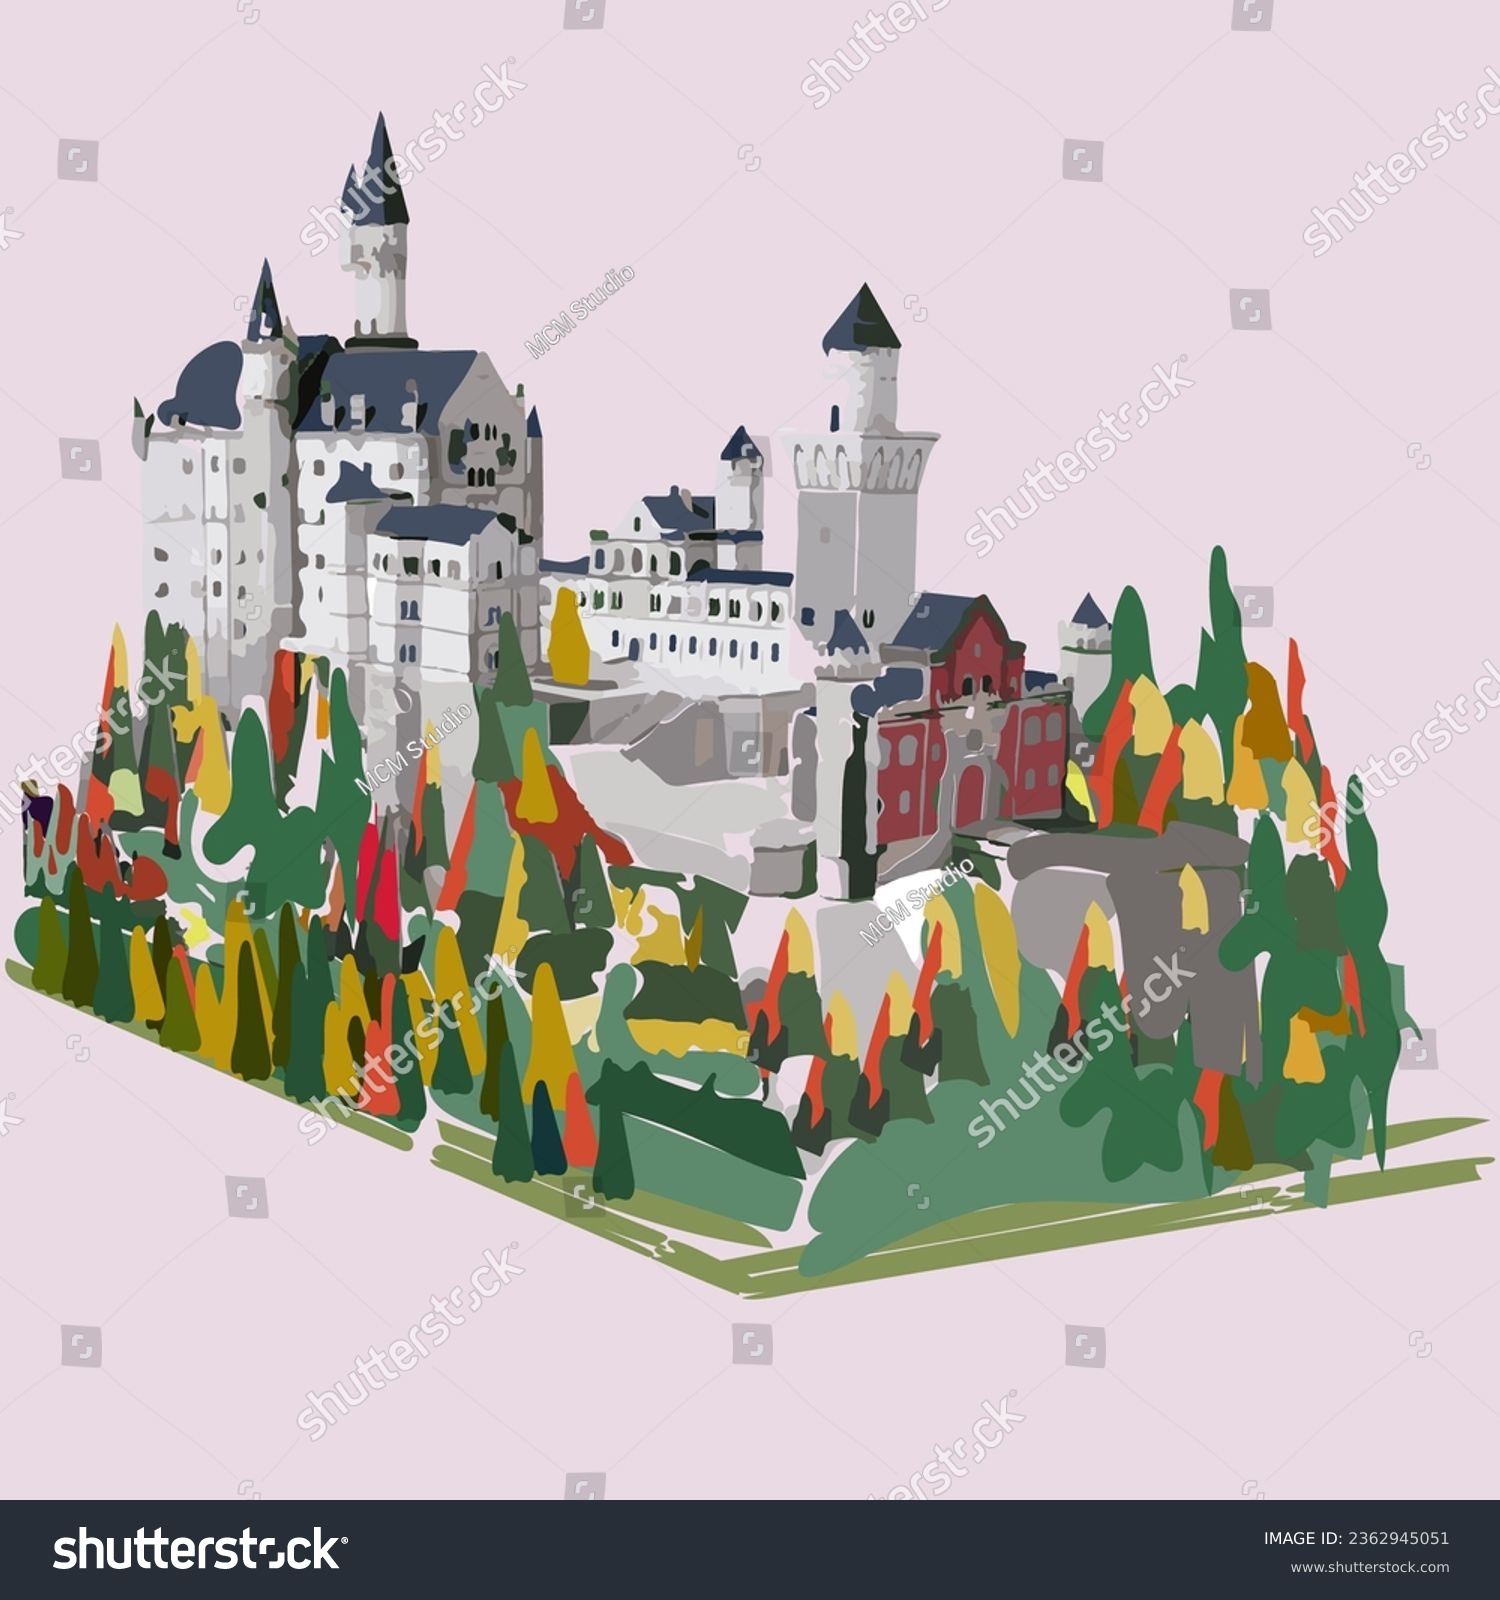 SVG of Neuschwanstein castle in Germany with view of buildings, trees and no mountains in full color vector with background pink svg